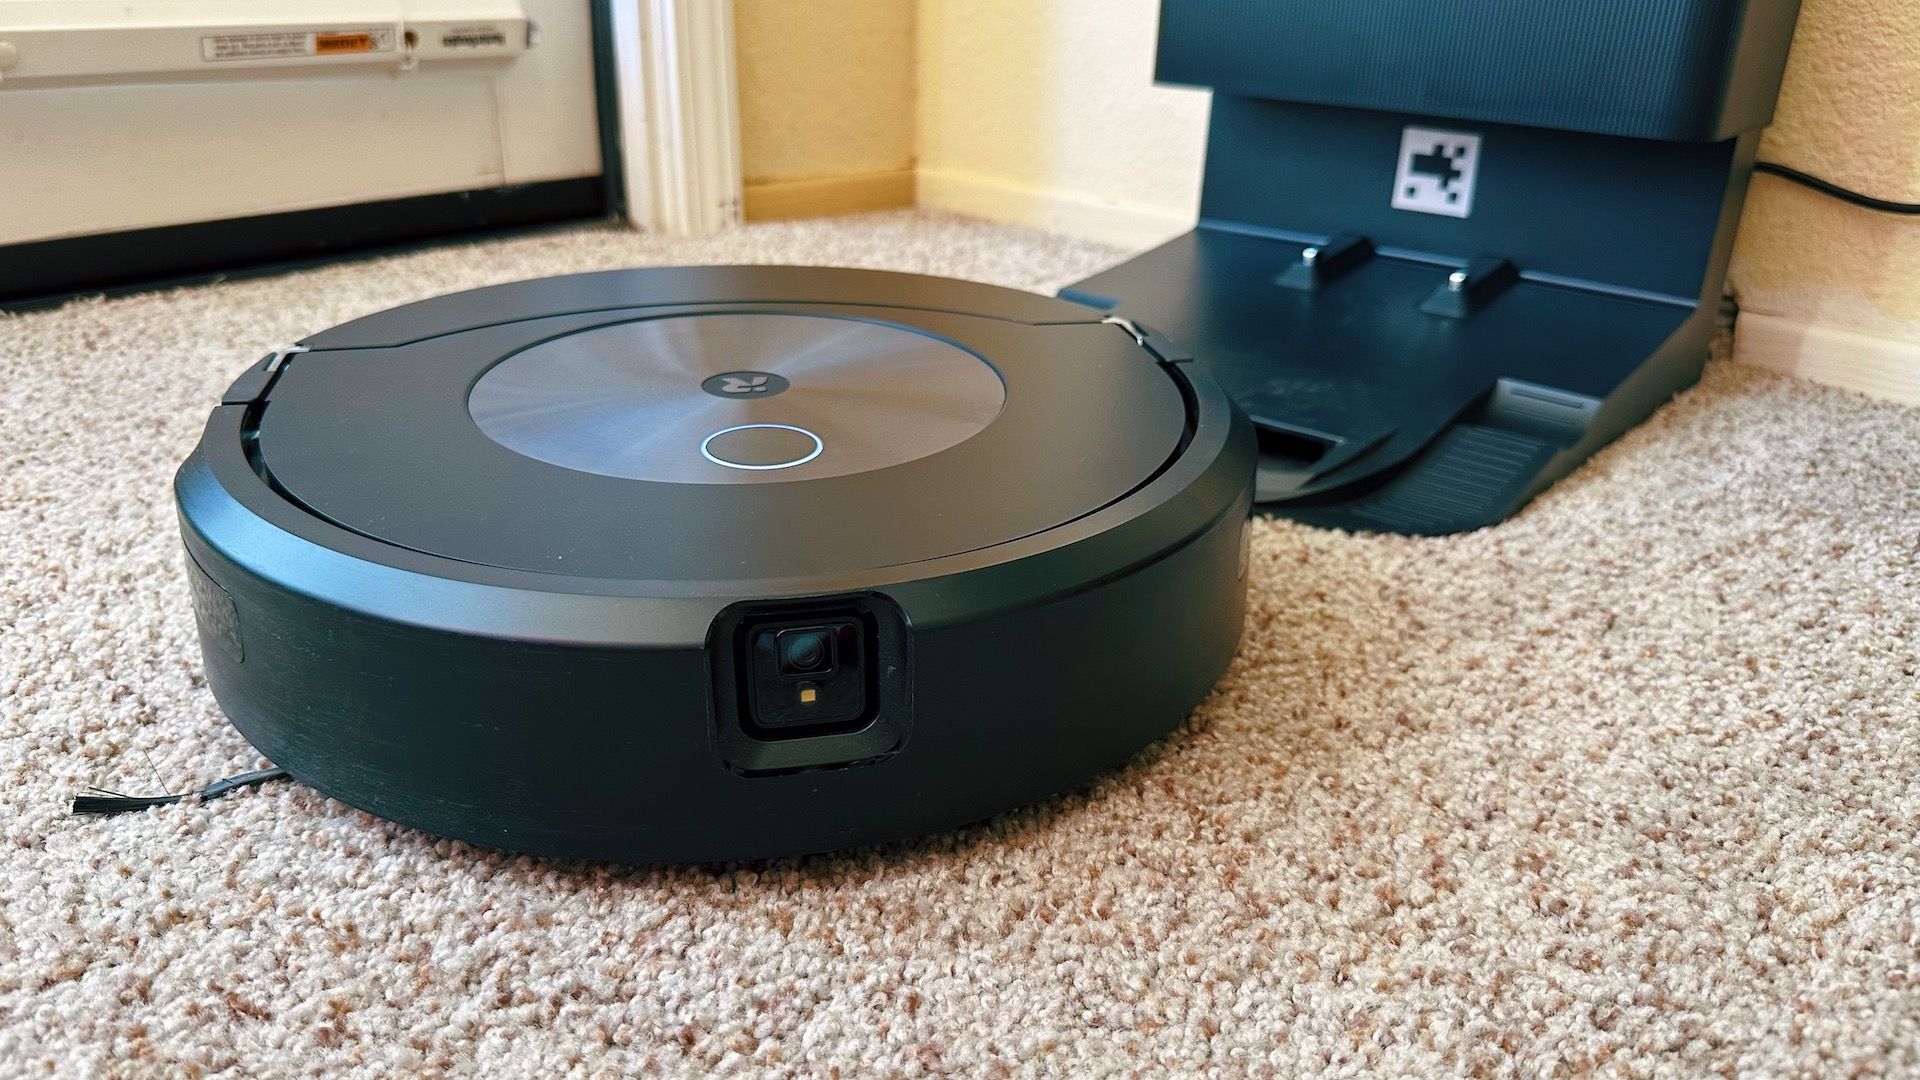 A Roomba robot vacuum begins to clean.